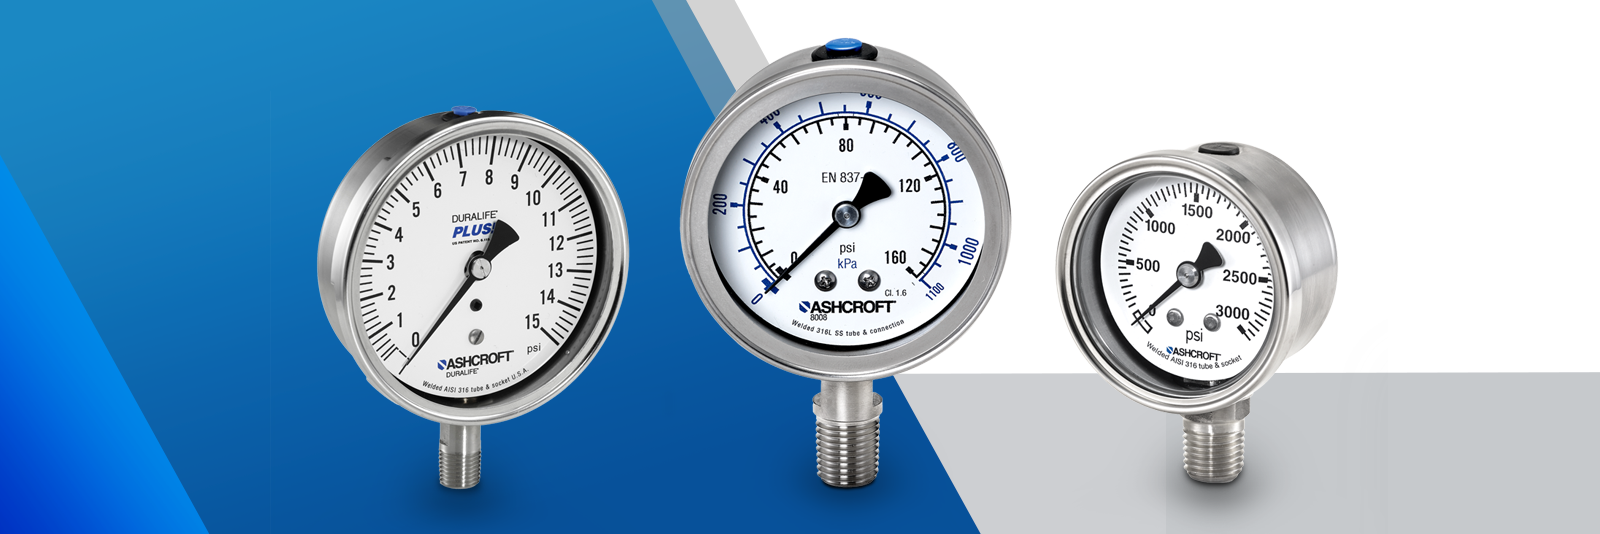 How Do I Select the Right Pressure Gauge Range?